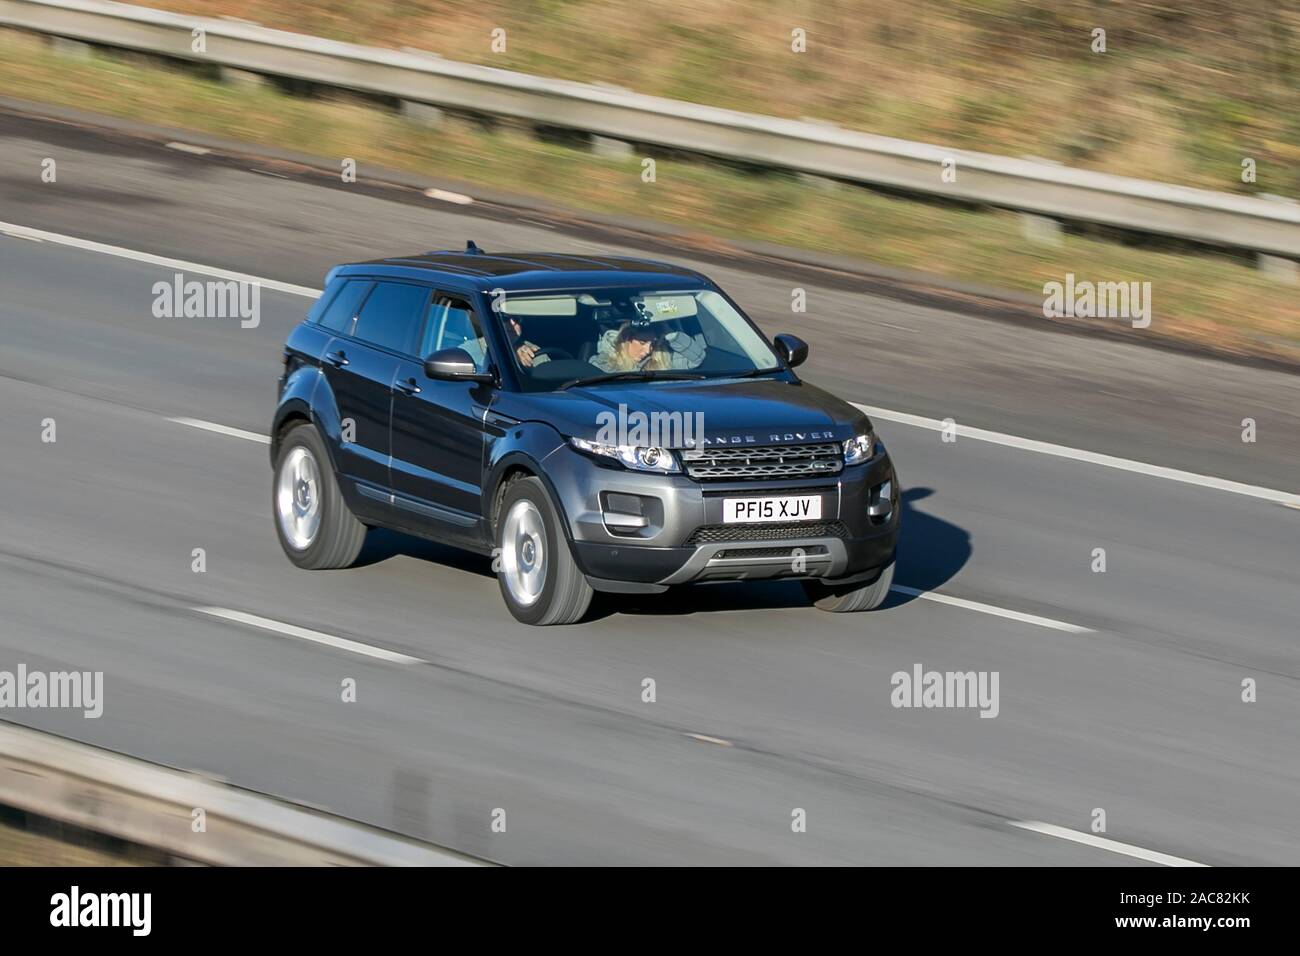 Blurred moving car 2015 Land Rover Range Rover Evoque Pure traveling at speed on the M61 motorway Slow camera shutter speed vehicle movement Stock Photo